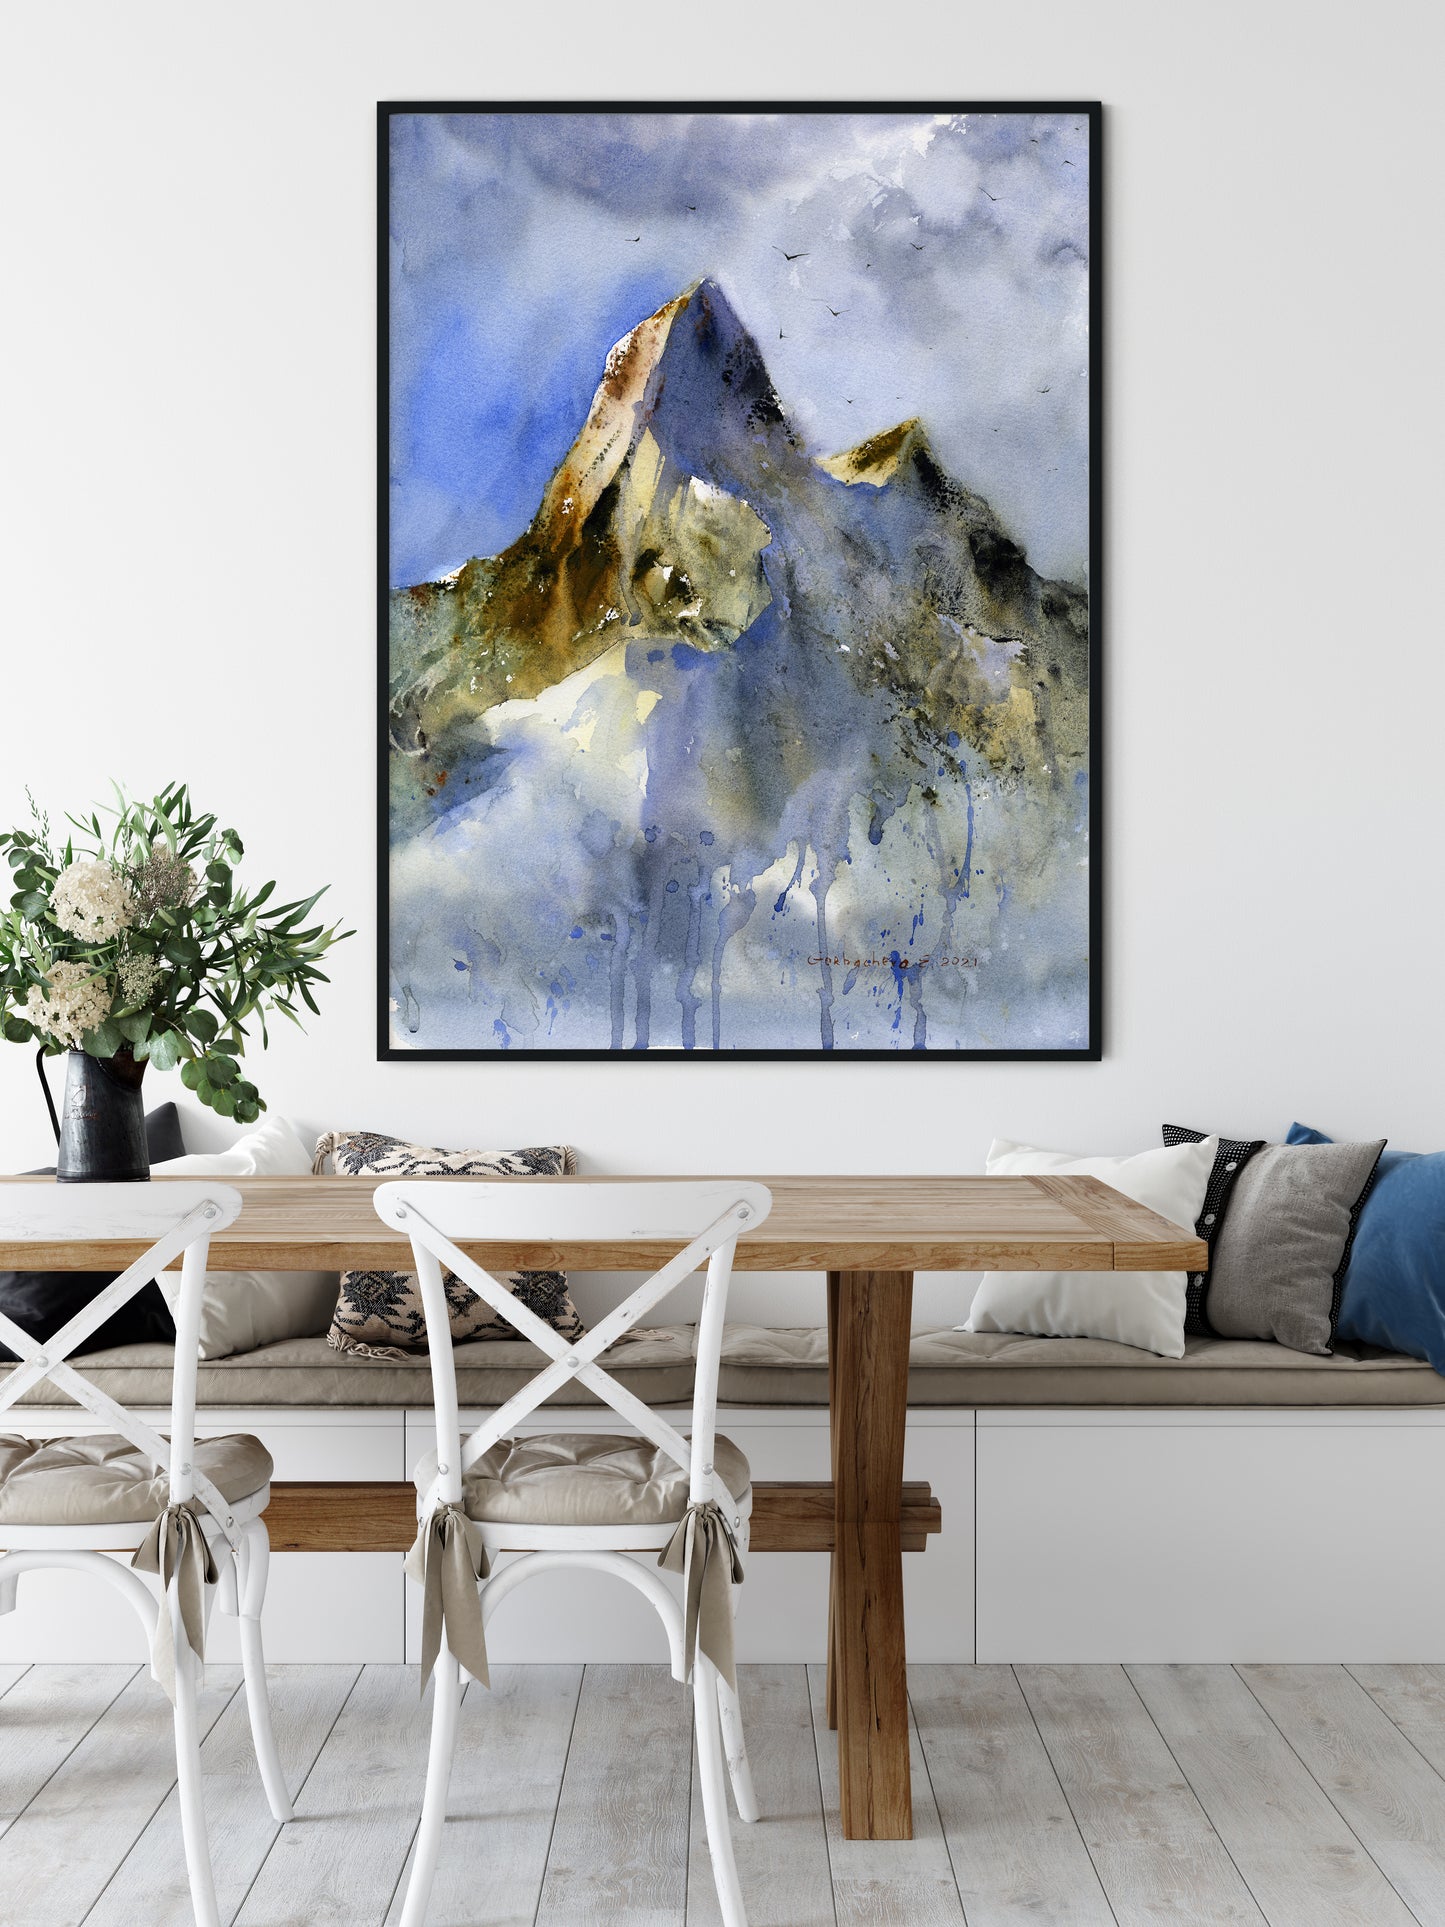 Watercolor Mountain Painting on Canvas, Landscape Wall Art, Mountains Print, House & Office Wall Decor, Modern Art Prints, Gift for Home